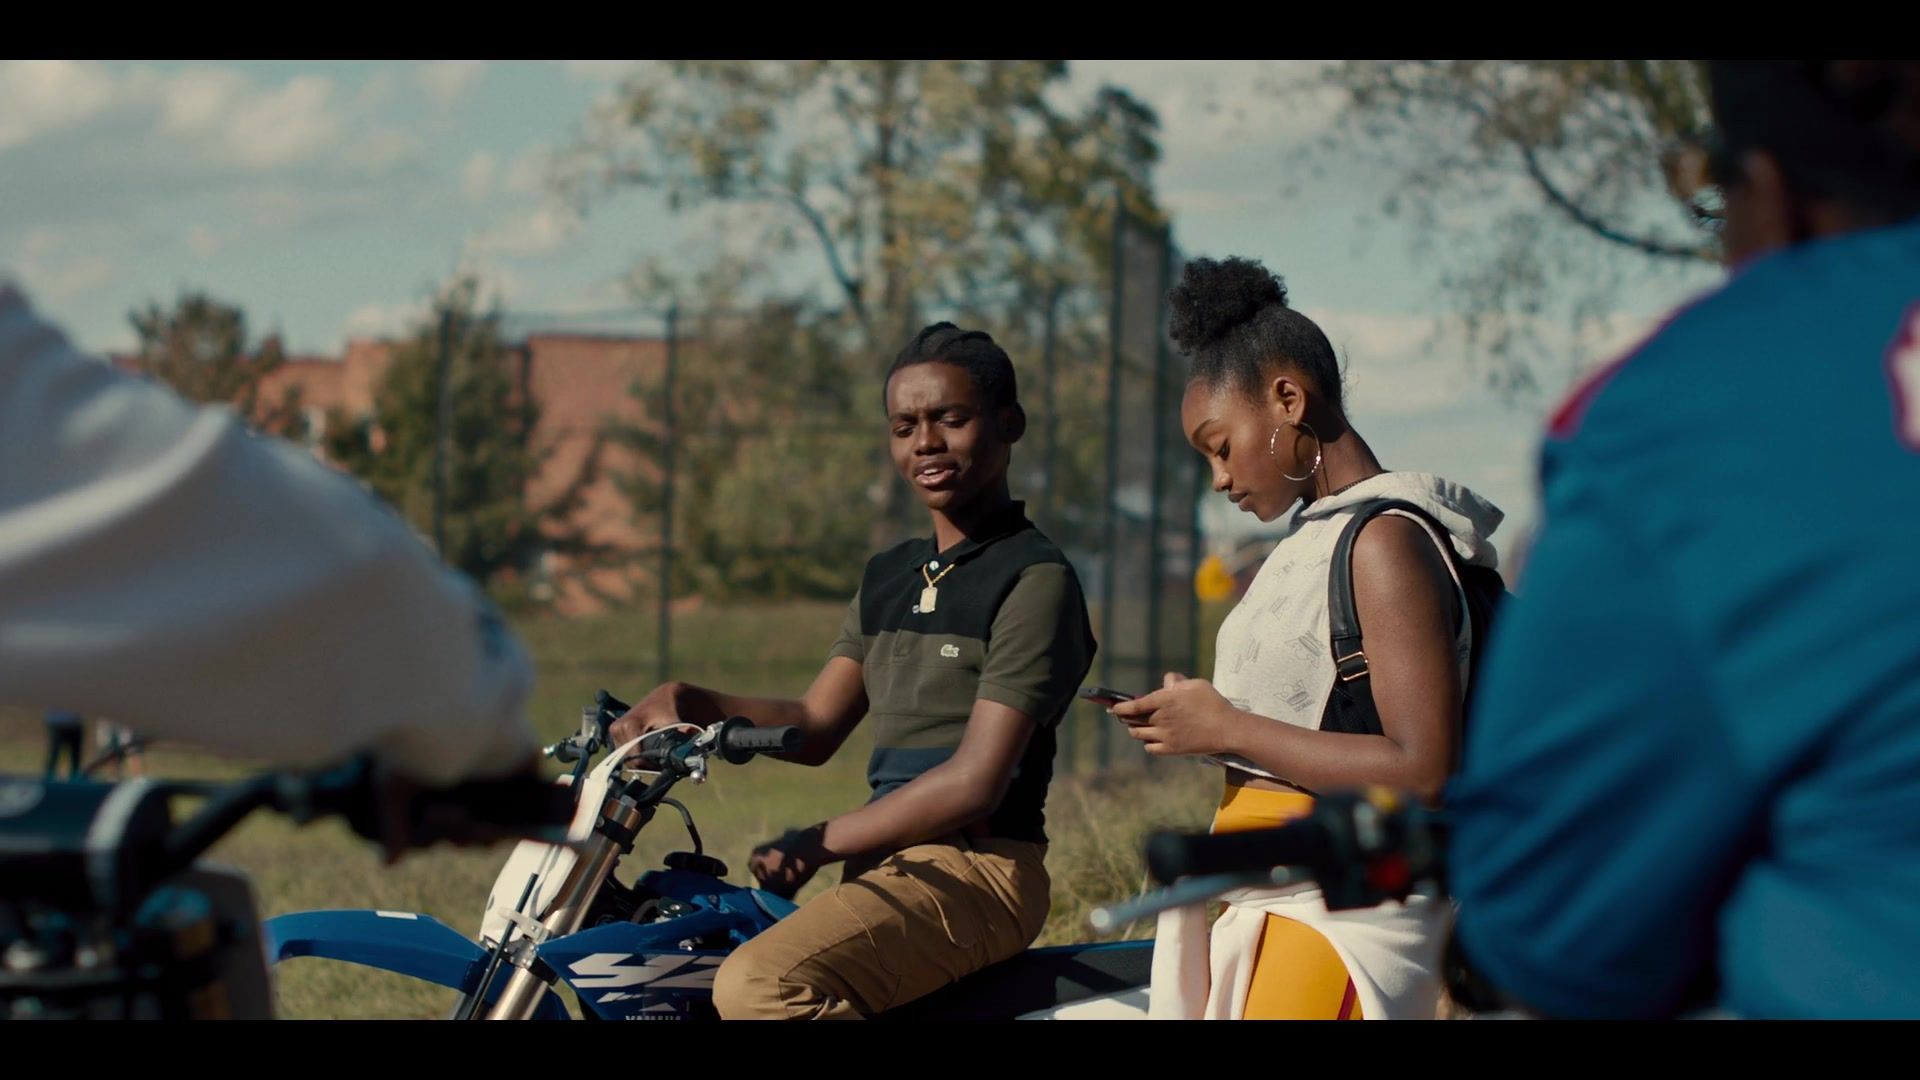 Lacoste Polo Shirt Of Jahi Di'Allo Winston As Mouse In Charm City Kings (2020)